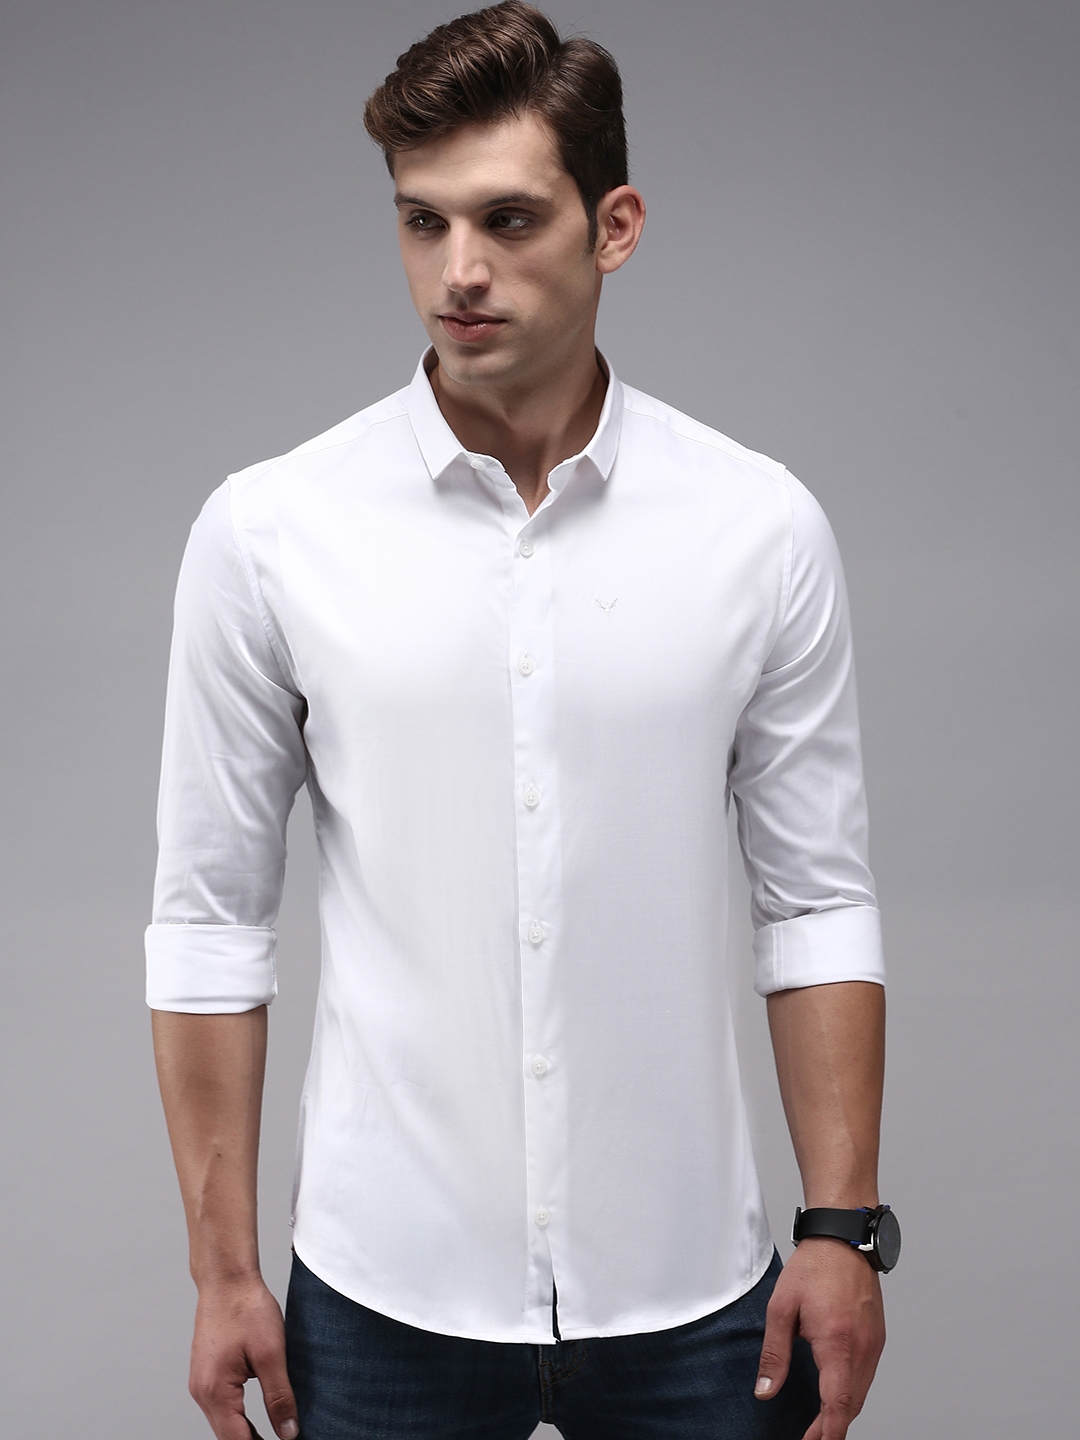 Showoff | SHOWOFF Men's White Spread Collar Solid Comfort Fit Shirt